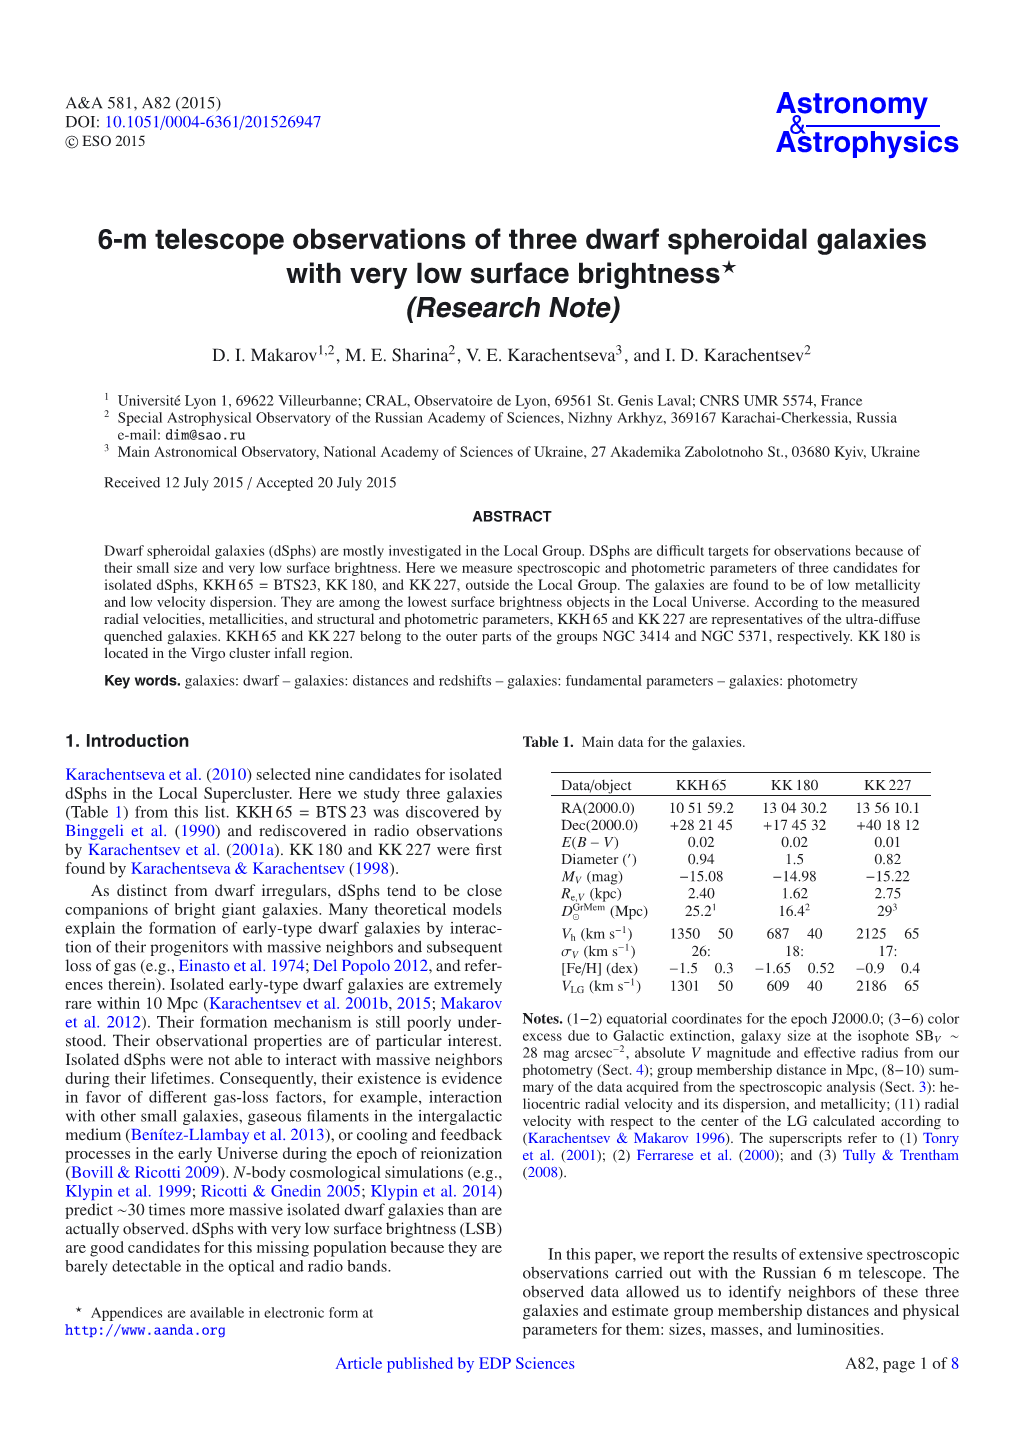 6-M Telescope Observations of Three Dwarf Spheroidal Galaxies with Very Low Surface Brightness (Research Note)